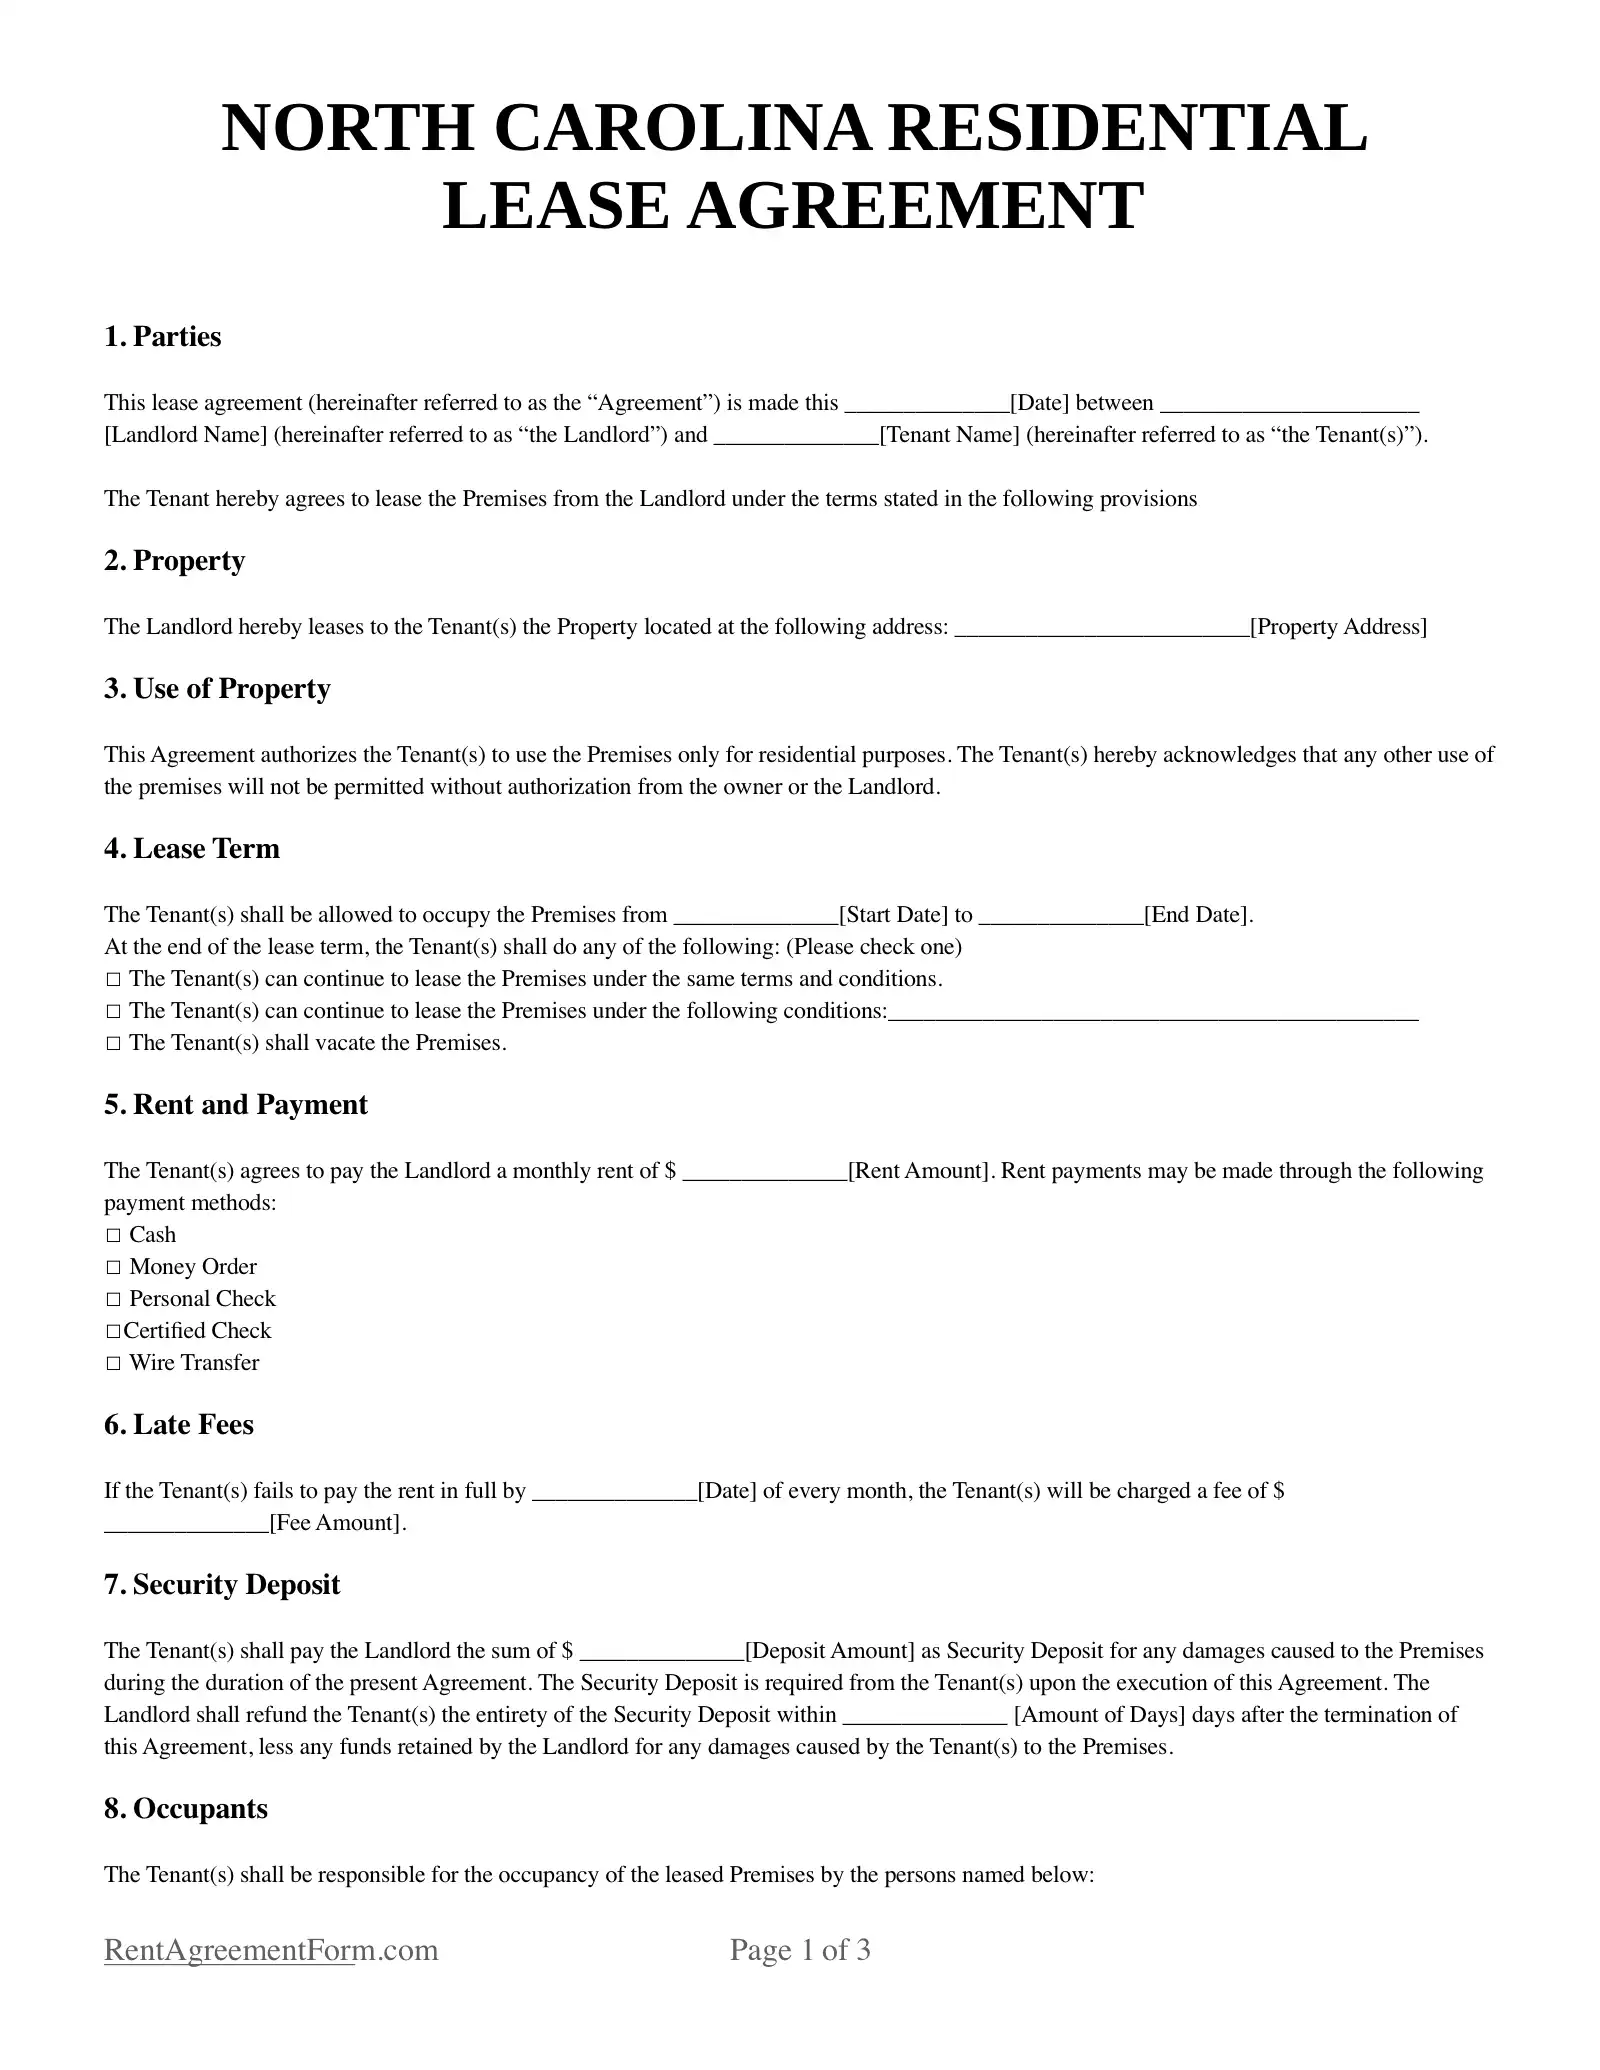 North Carolina Residential Lease Agreement Sample